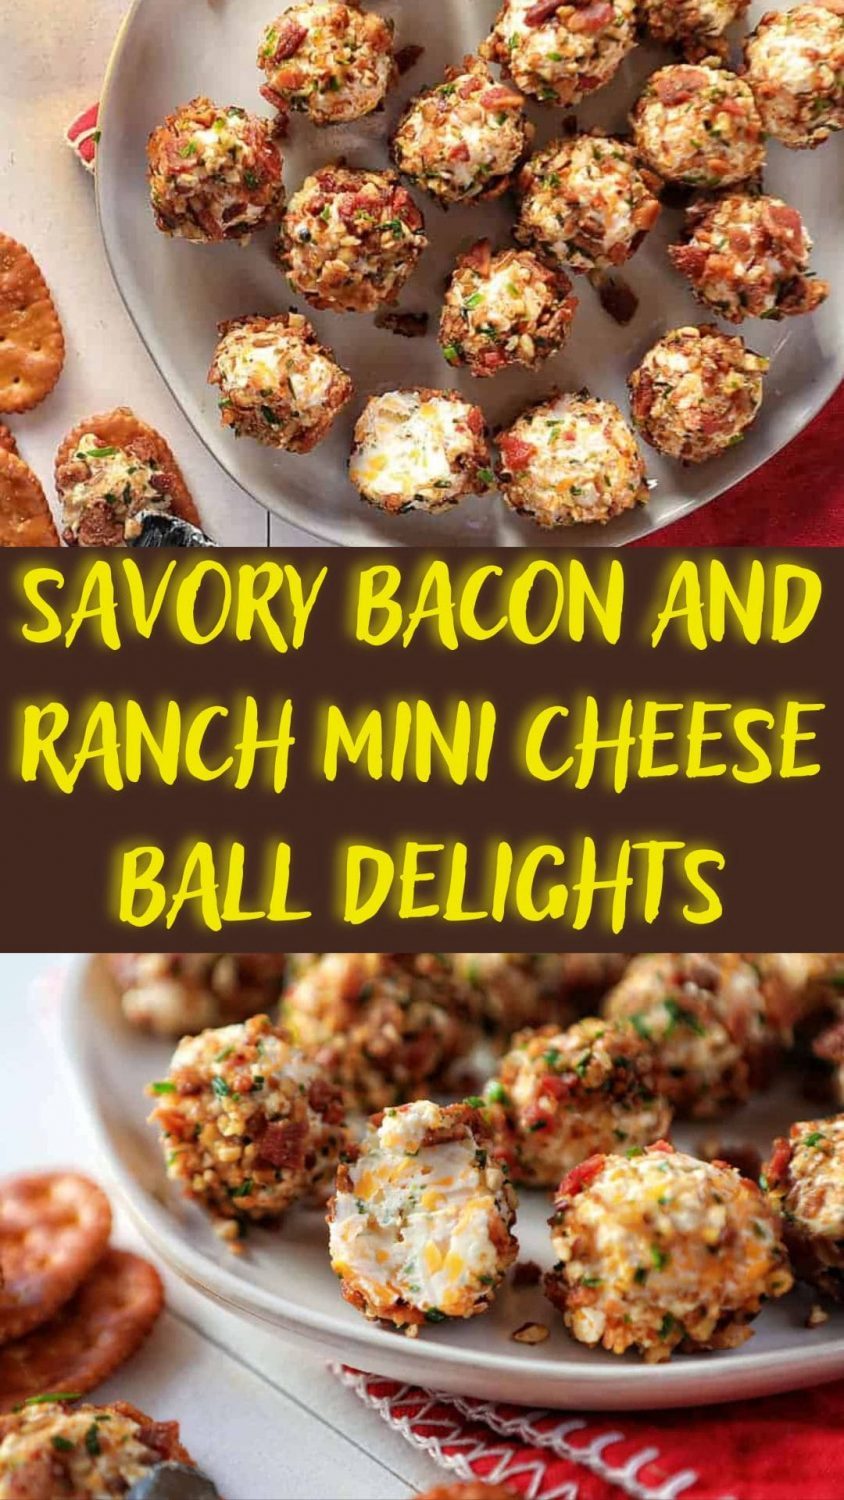 Savory Bacon and Ranch Mini Cheese Ball Delights